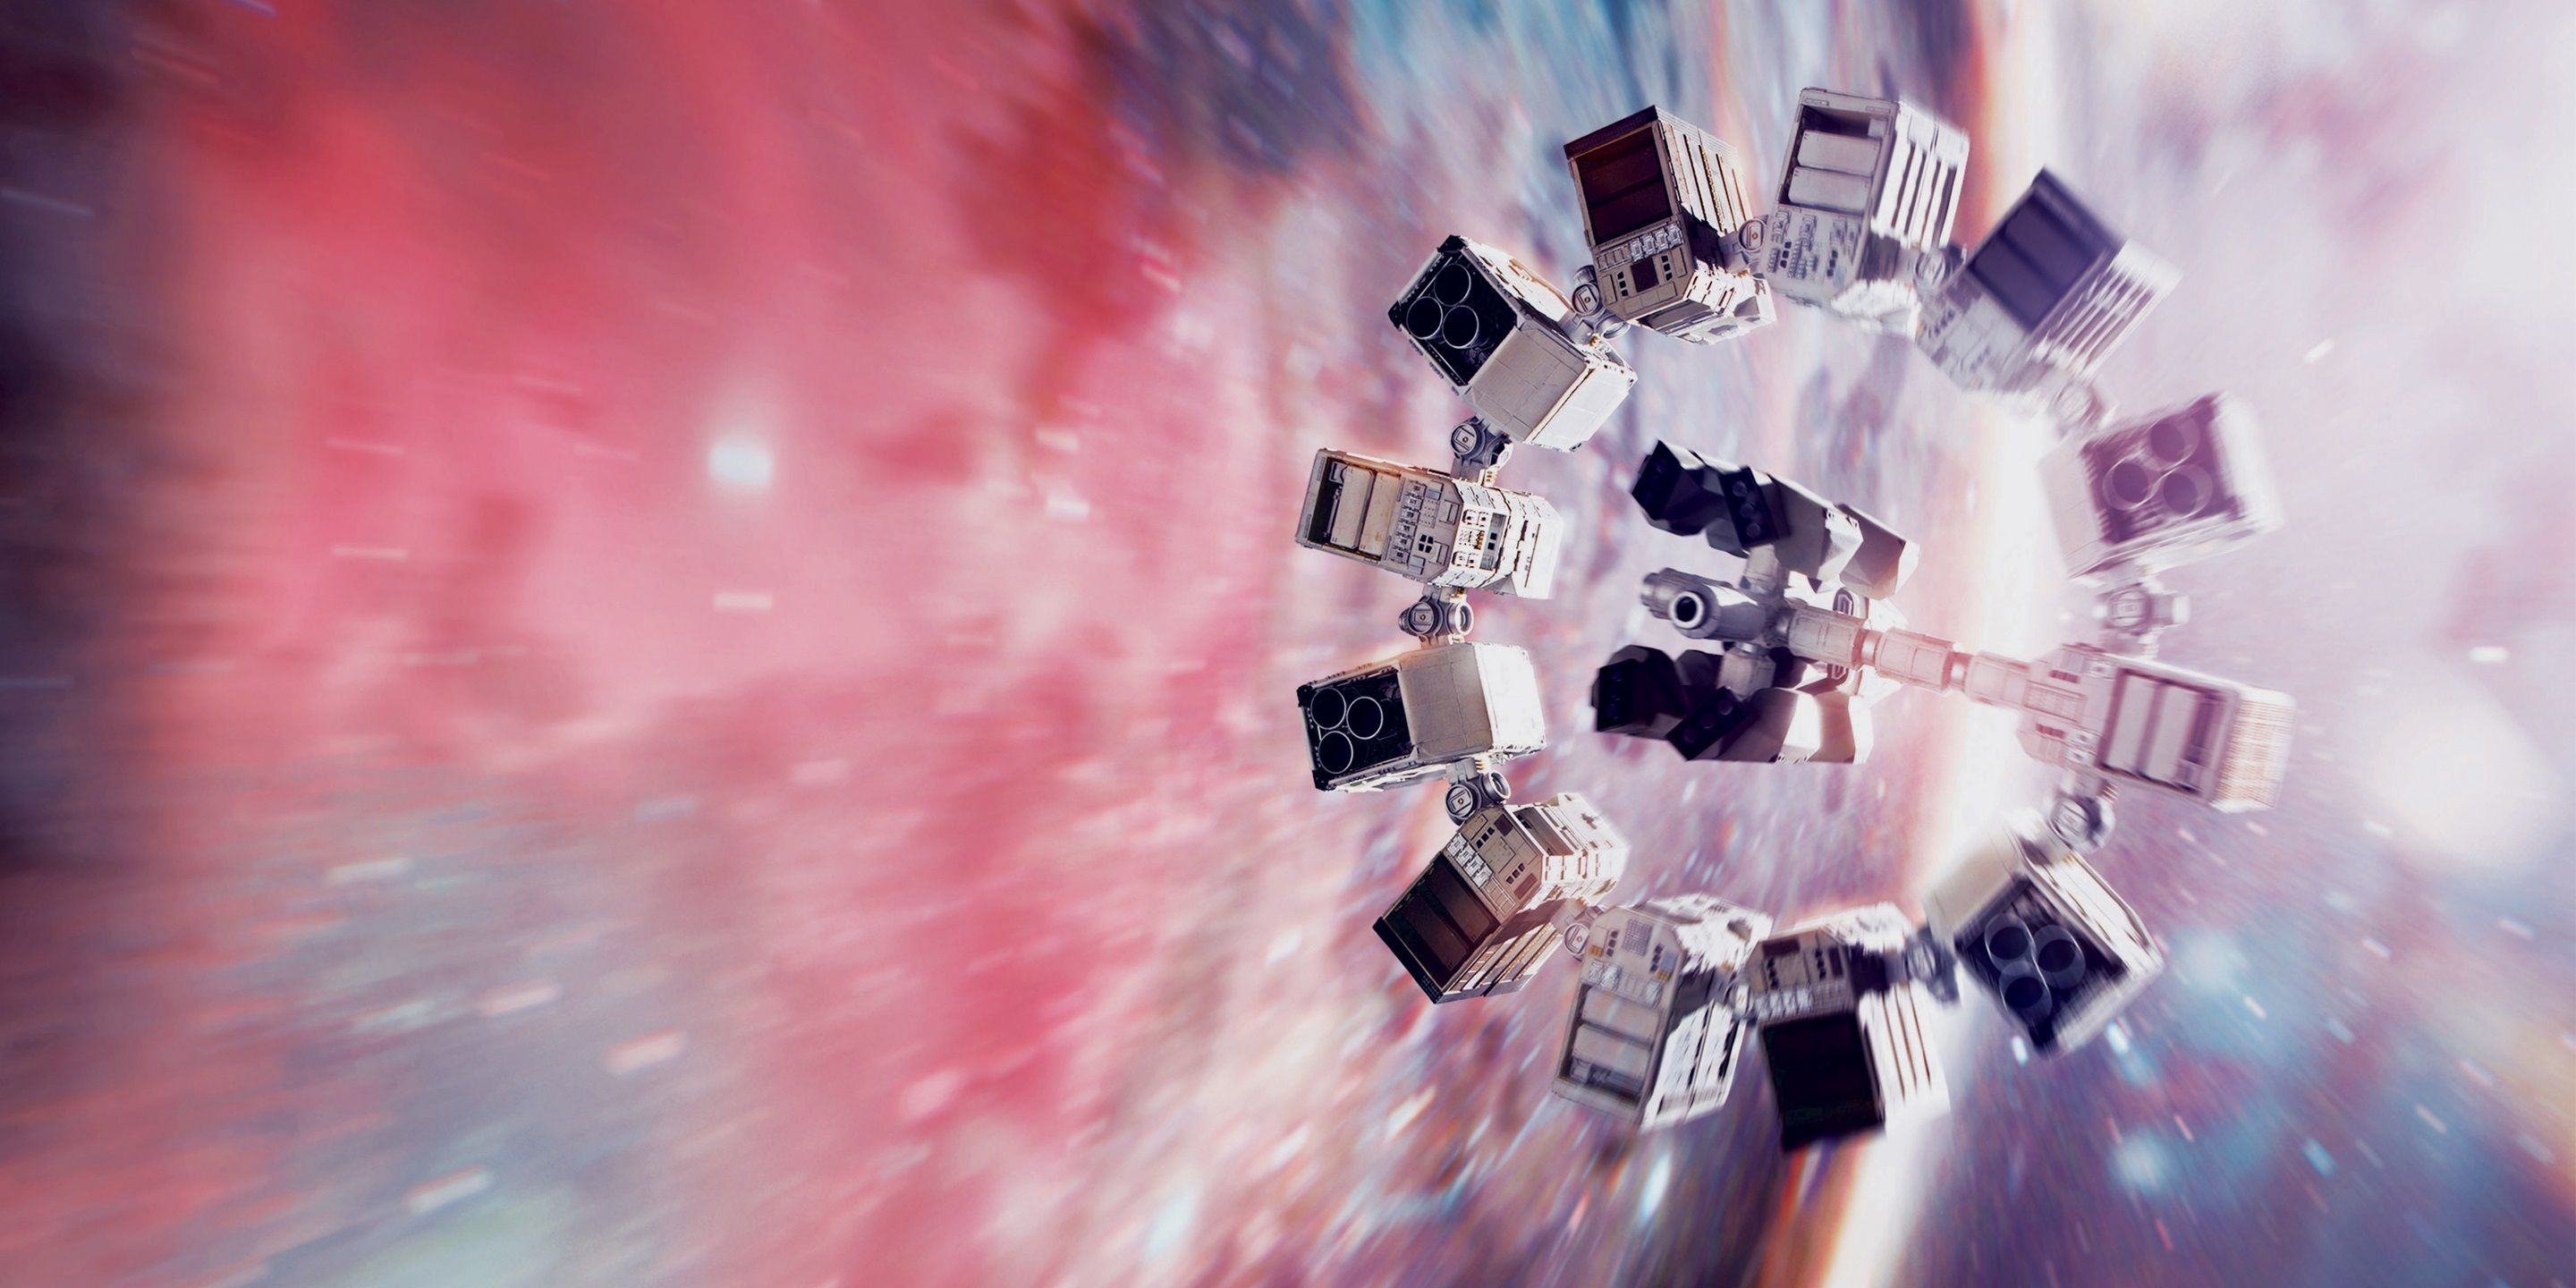 The ship floats through space in Interstellar